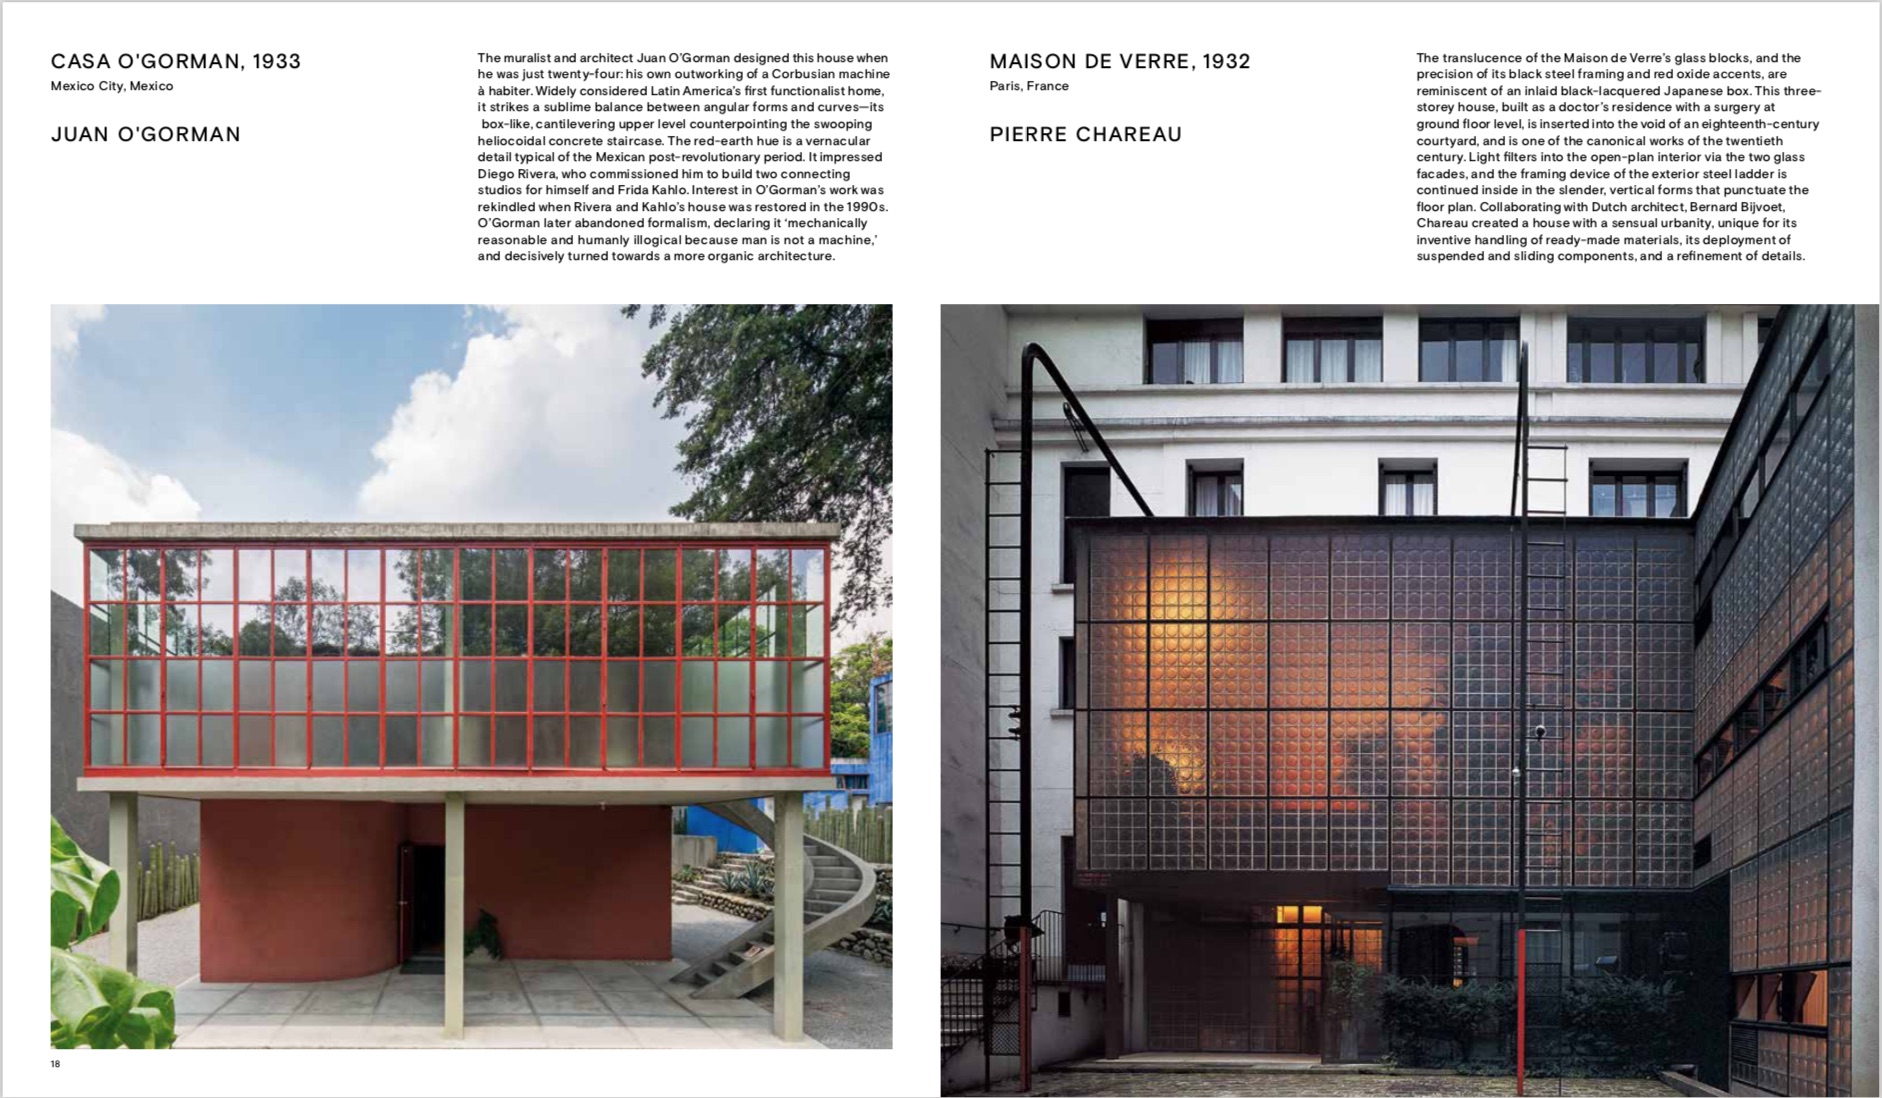 By Phaidon Editors from Houses: Extraordinary Living copyright Phaidon 2019